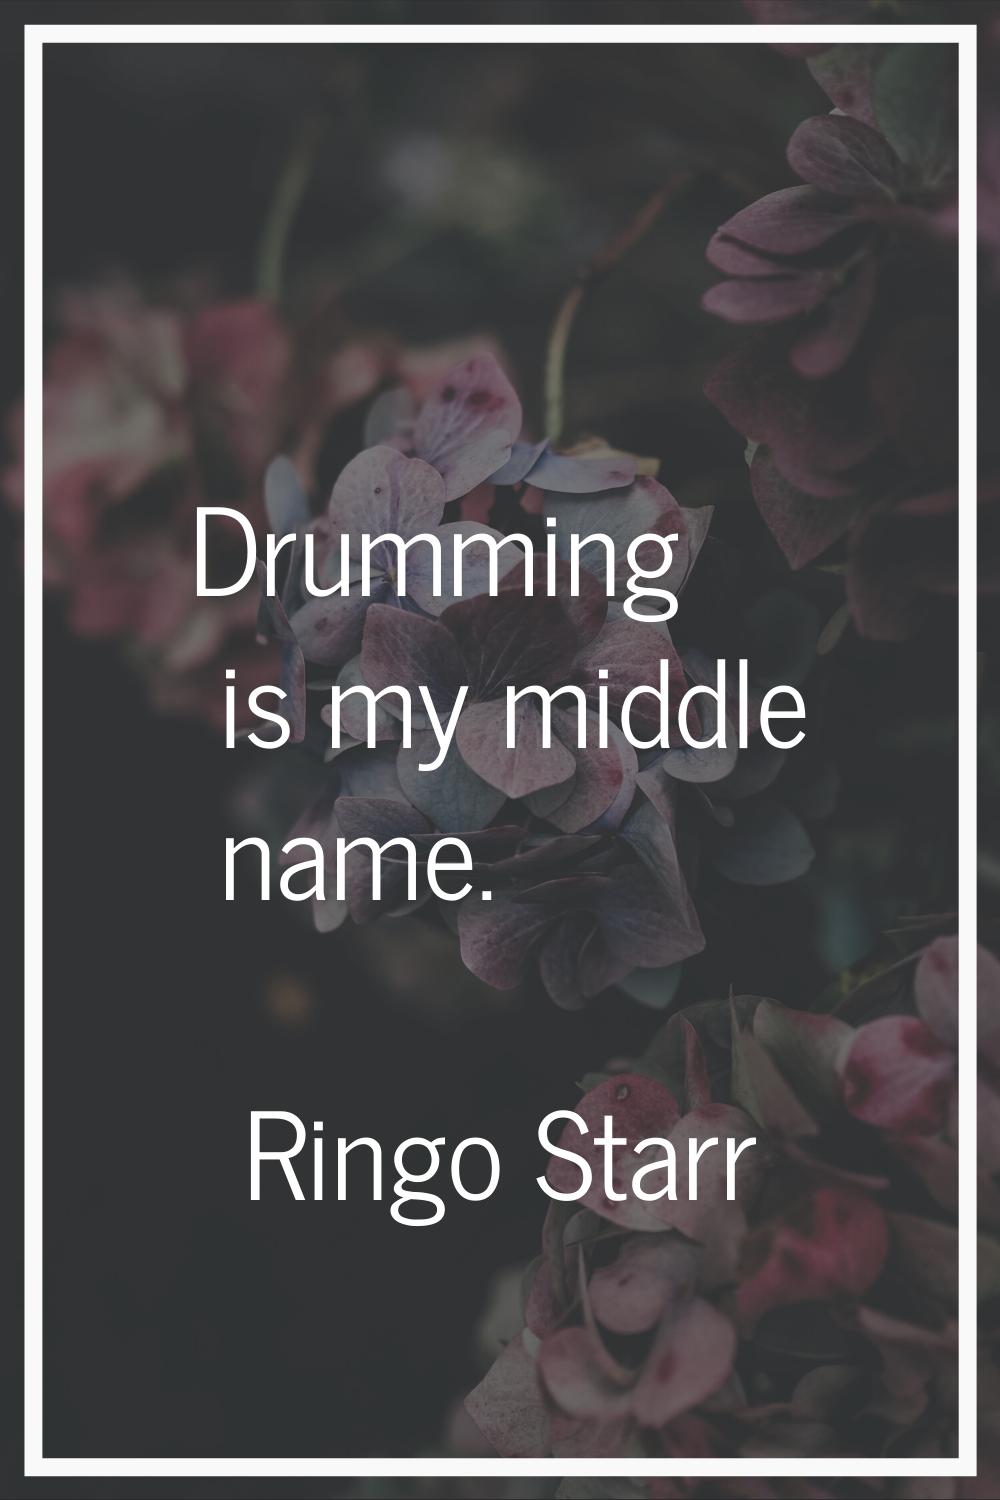 Drumming is my middle name.